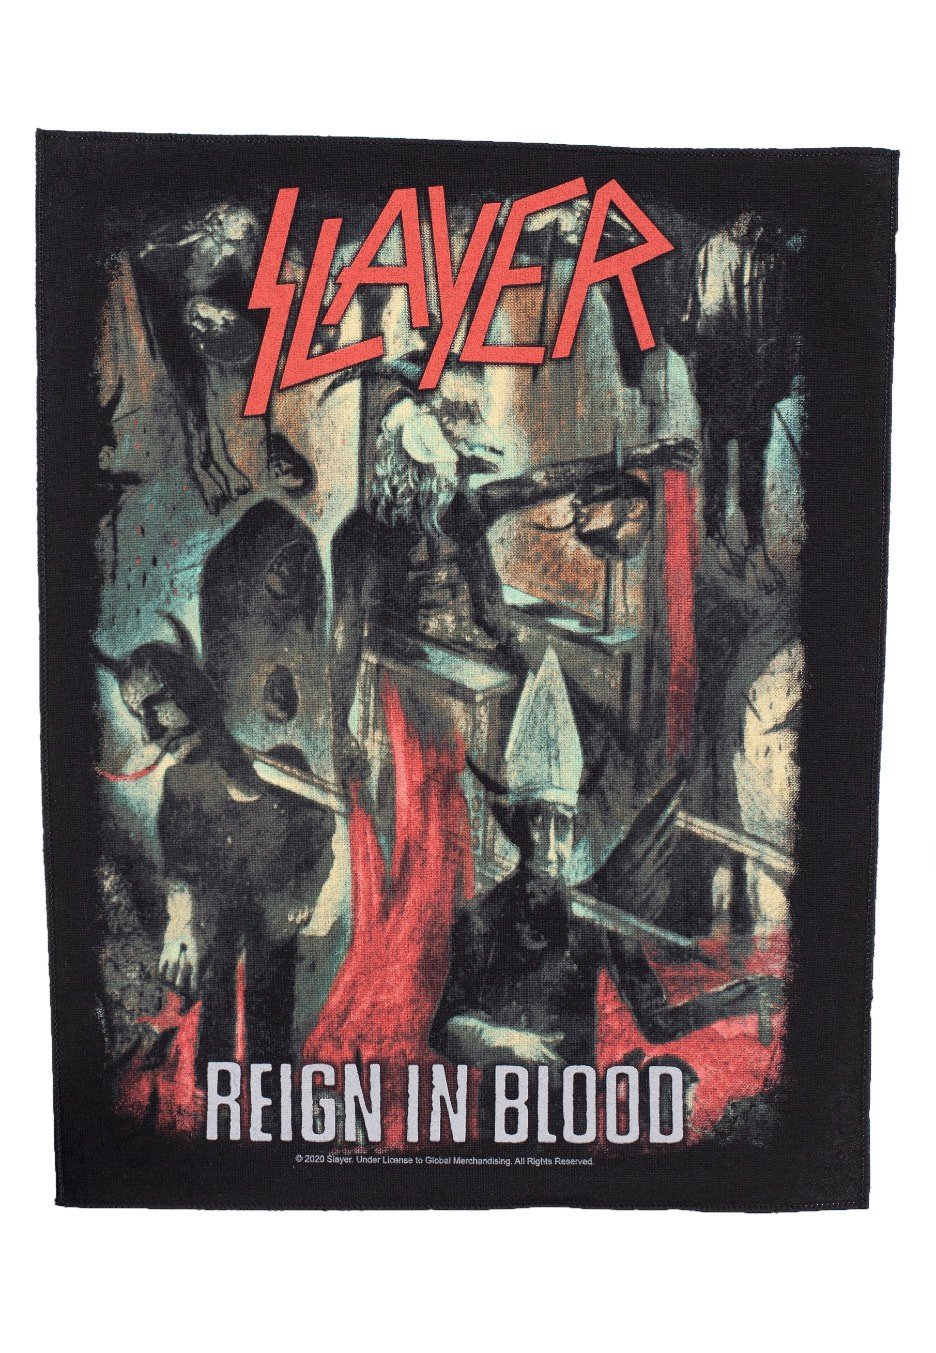 Slayer - Reign In Blood - Backpatch